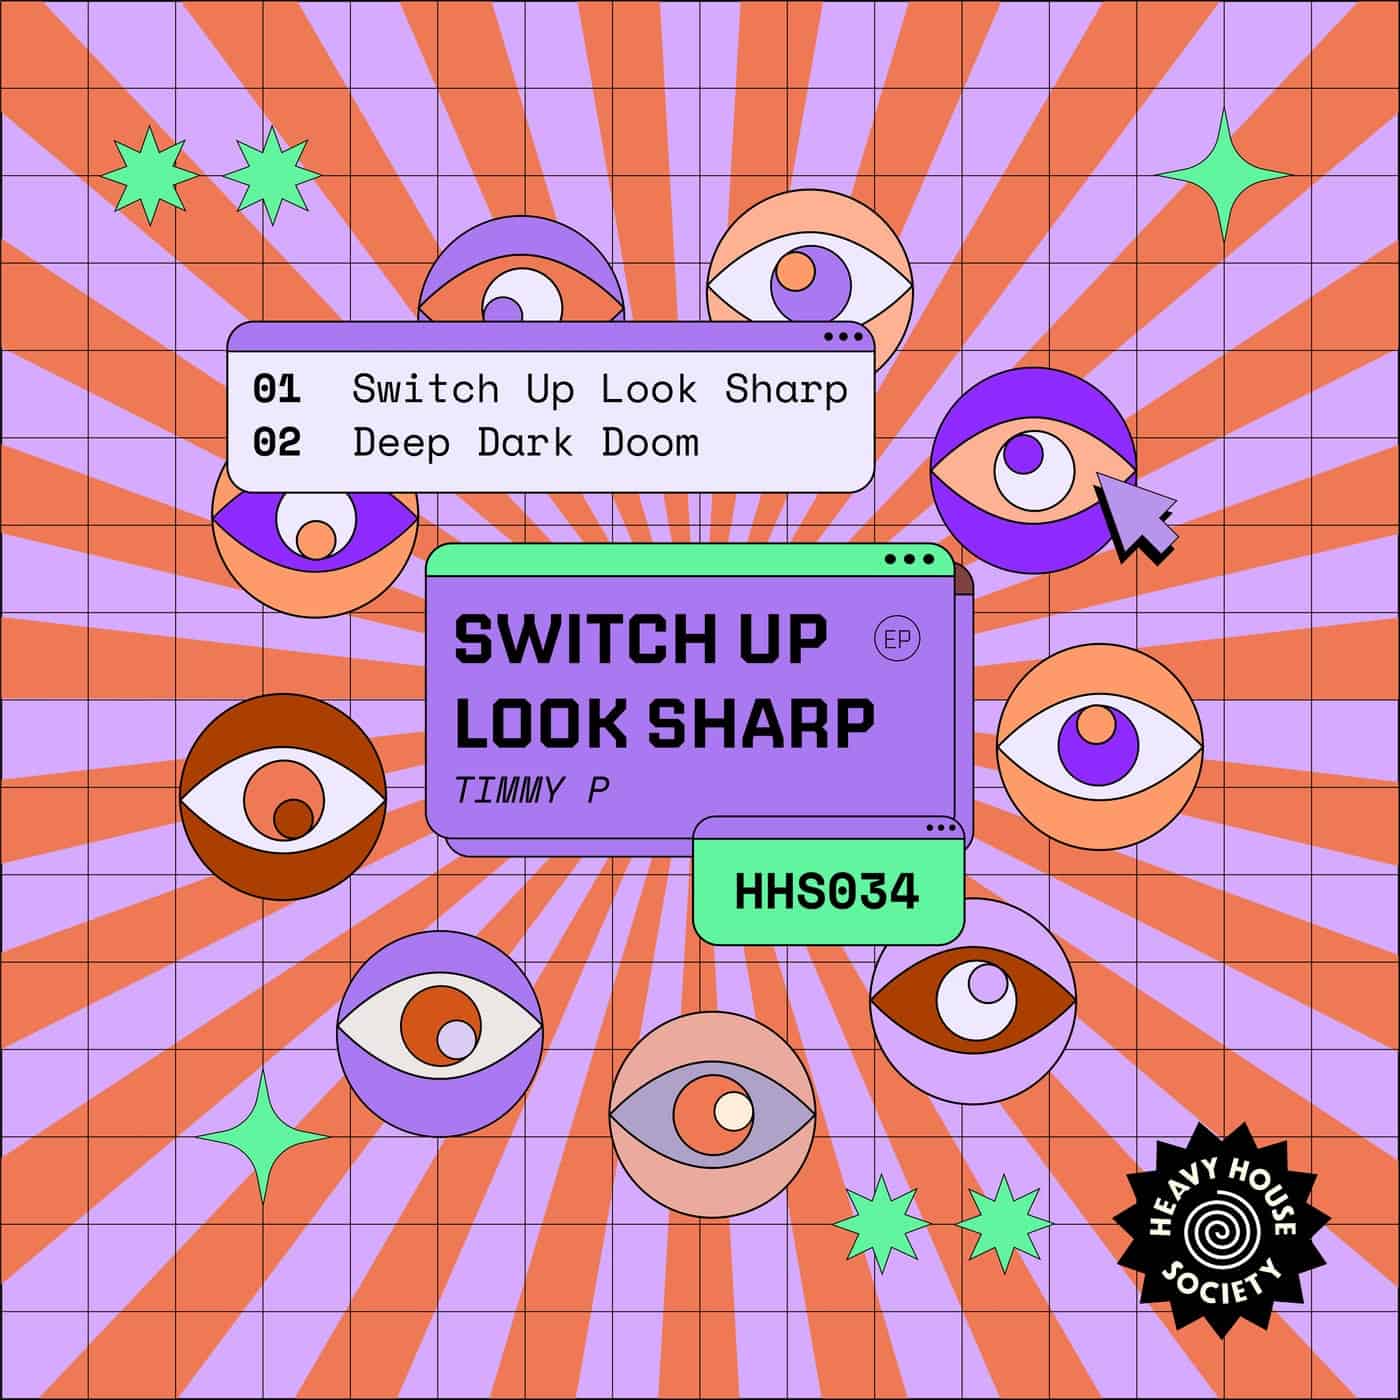 image cover: Switch Up Look Sharp EP by Timmy P on Heavy House Society